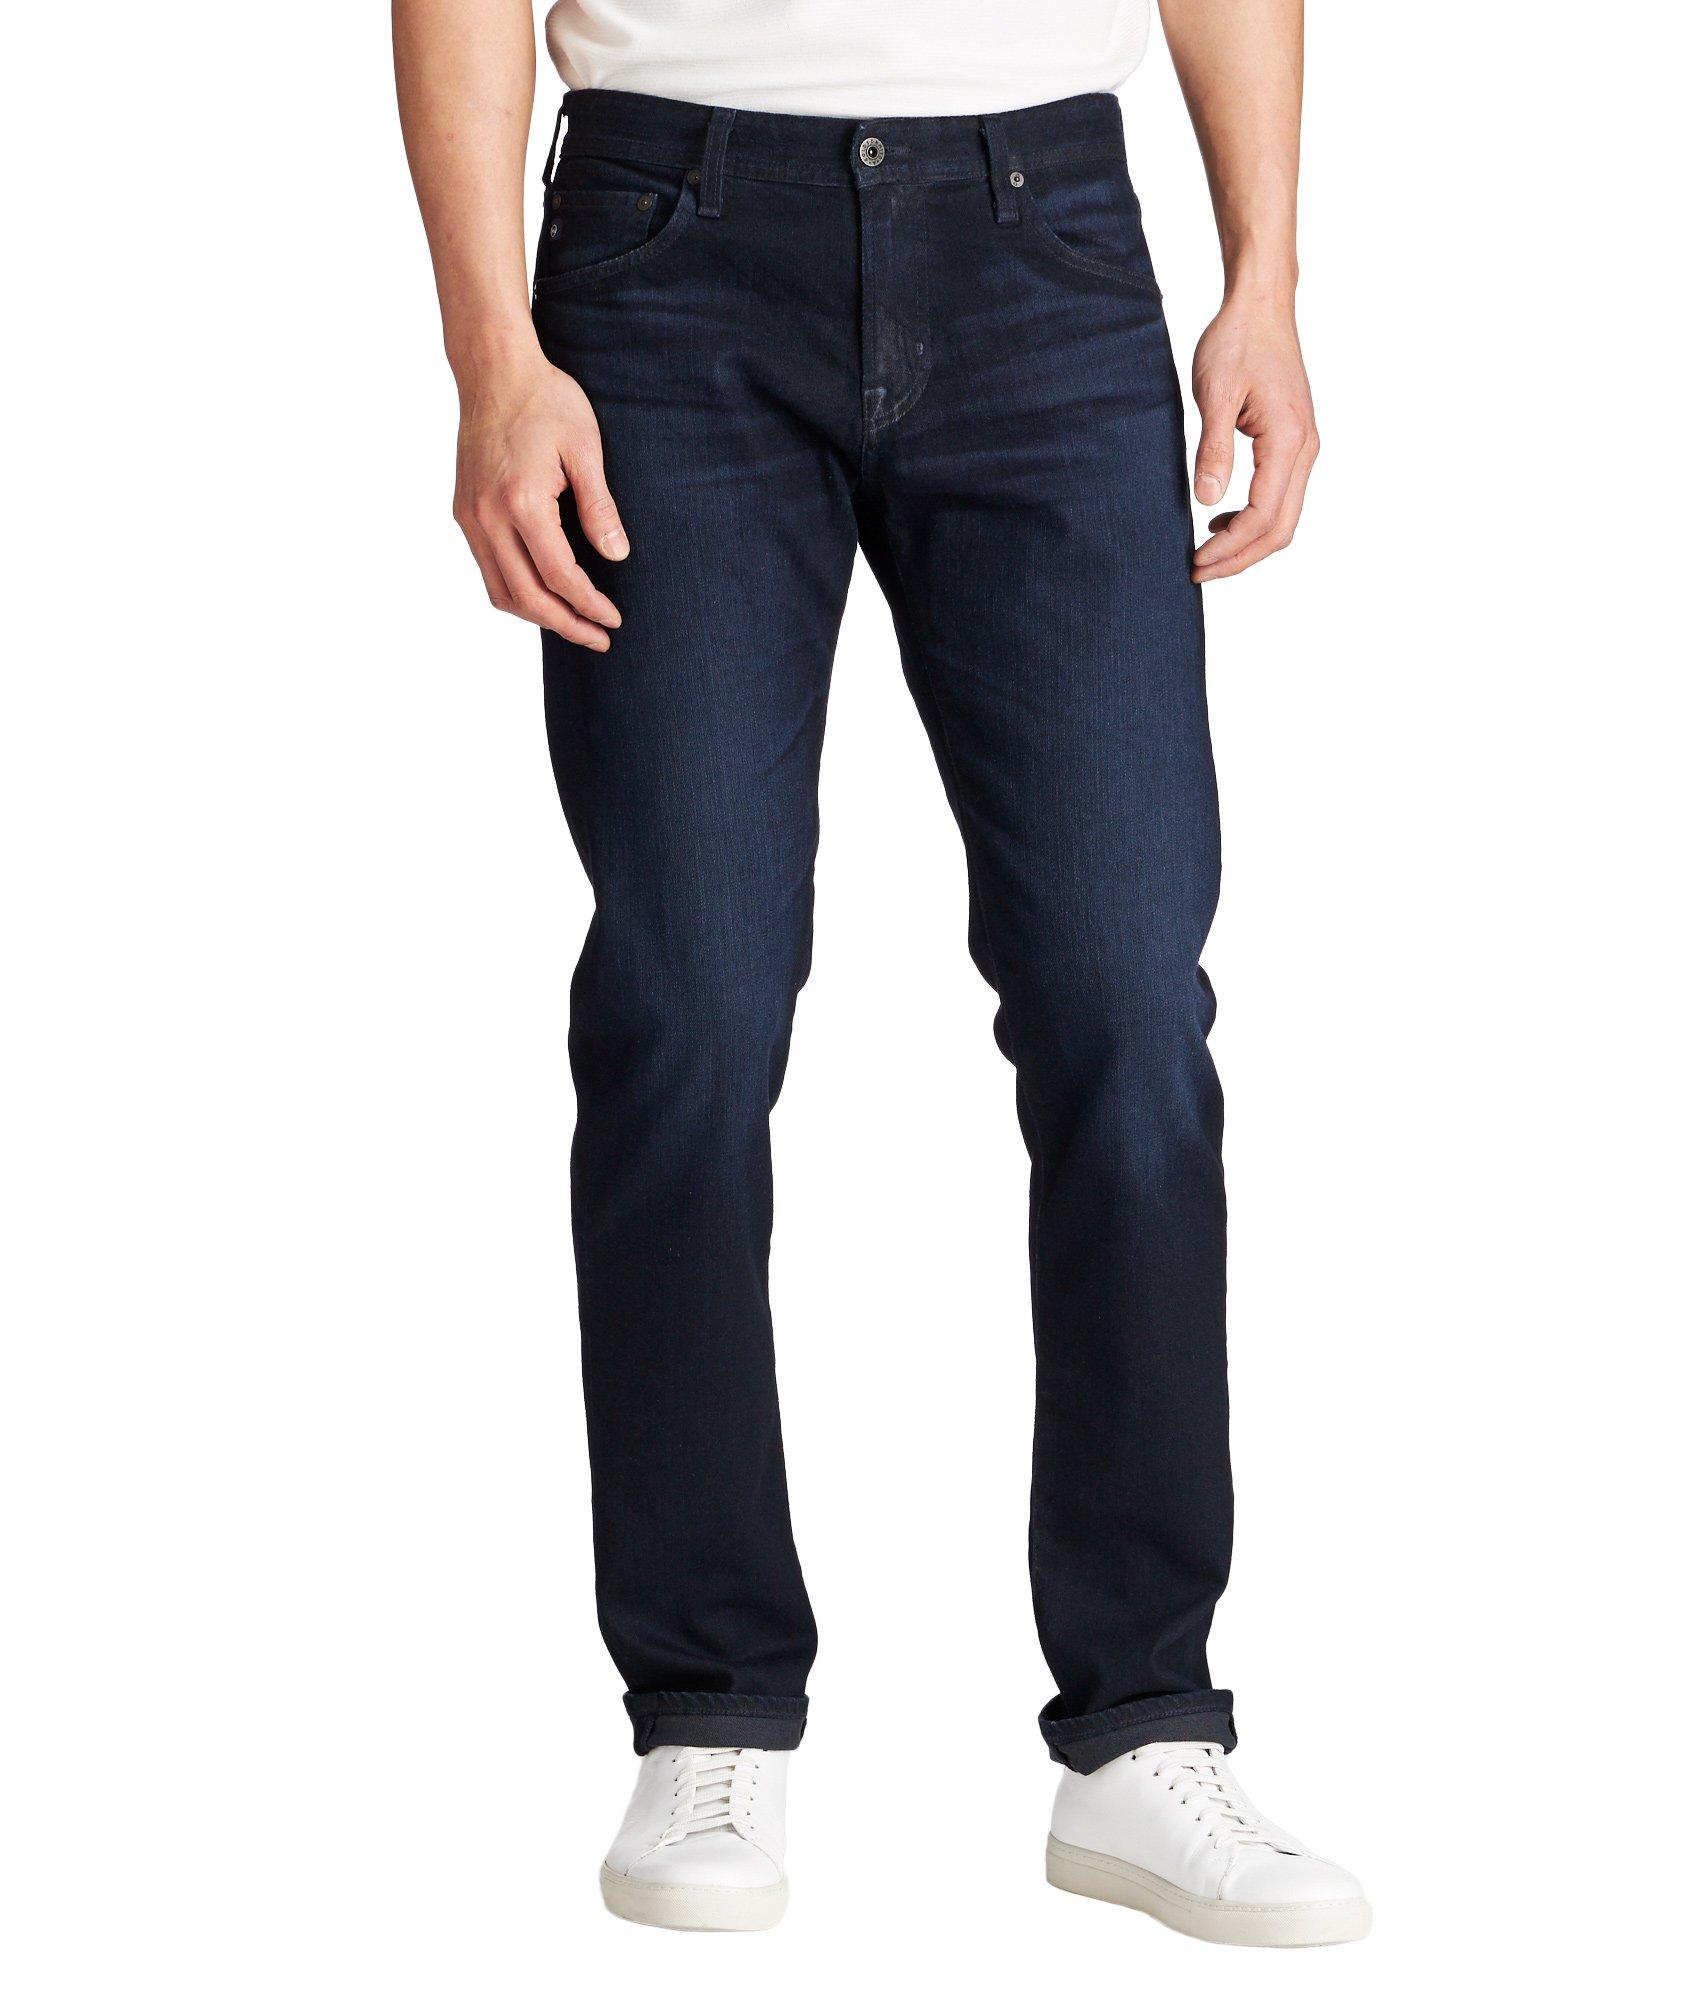 AG Adriano Goldschmied Mens the Matchbox Slim-Fit Jean in Jack Wash